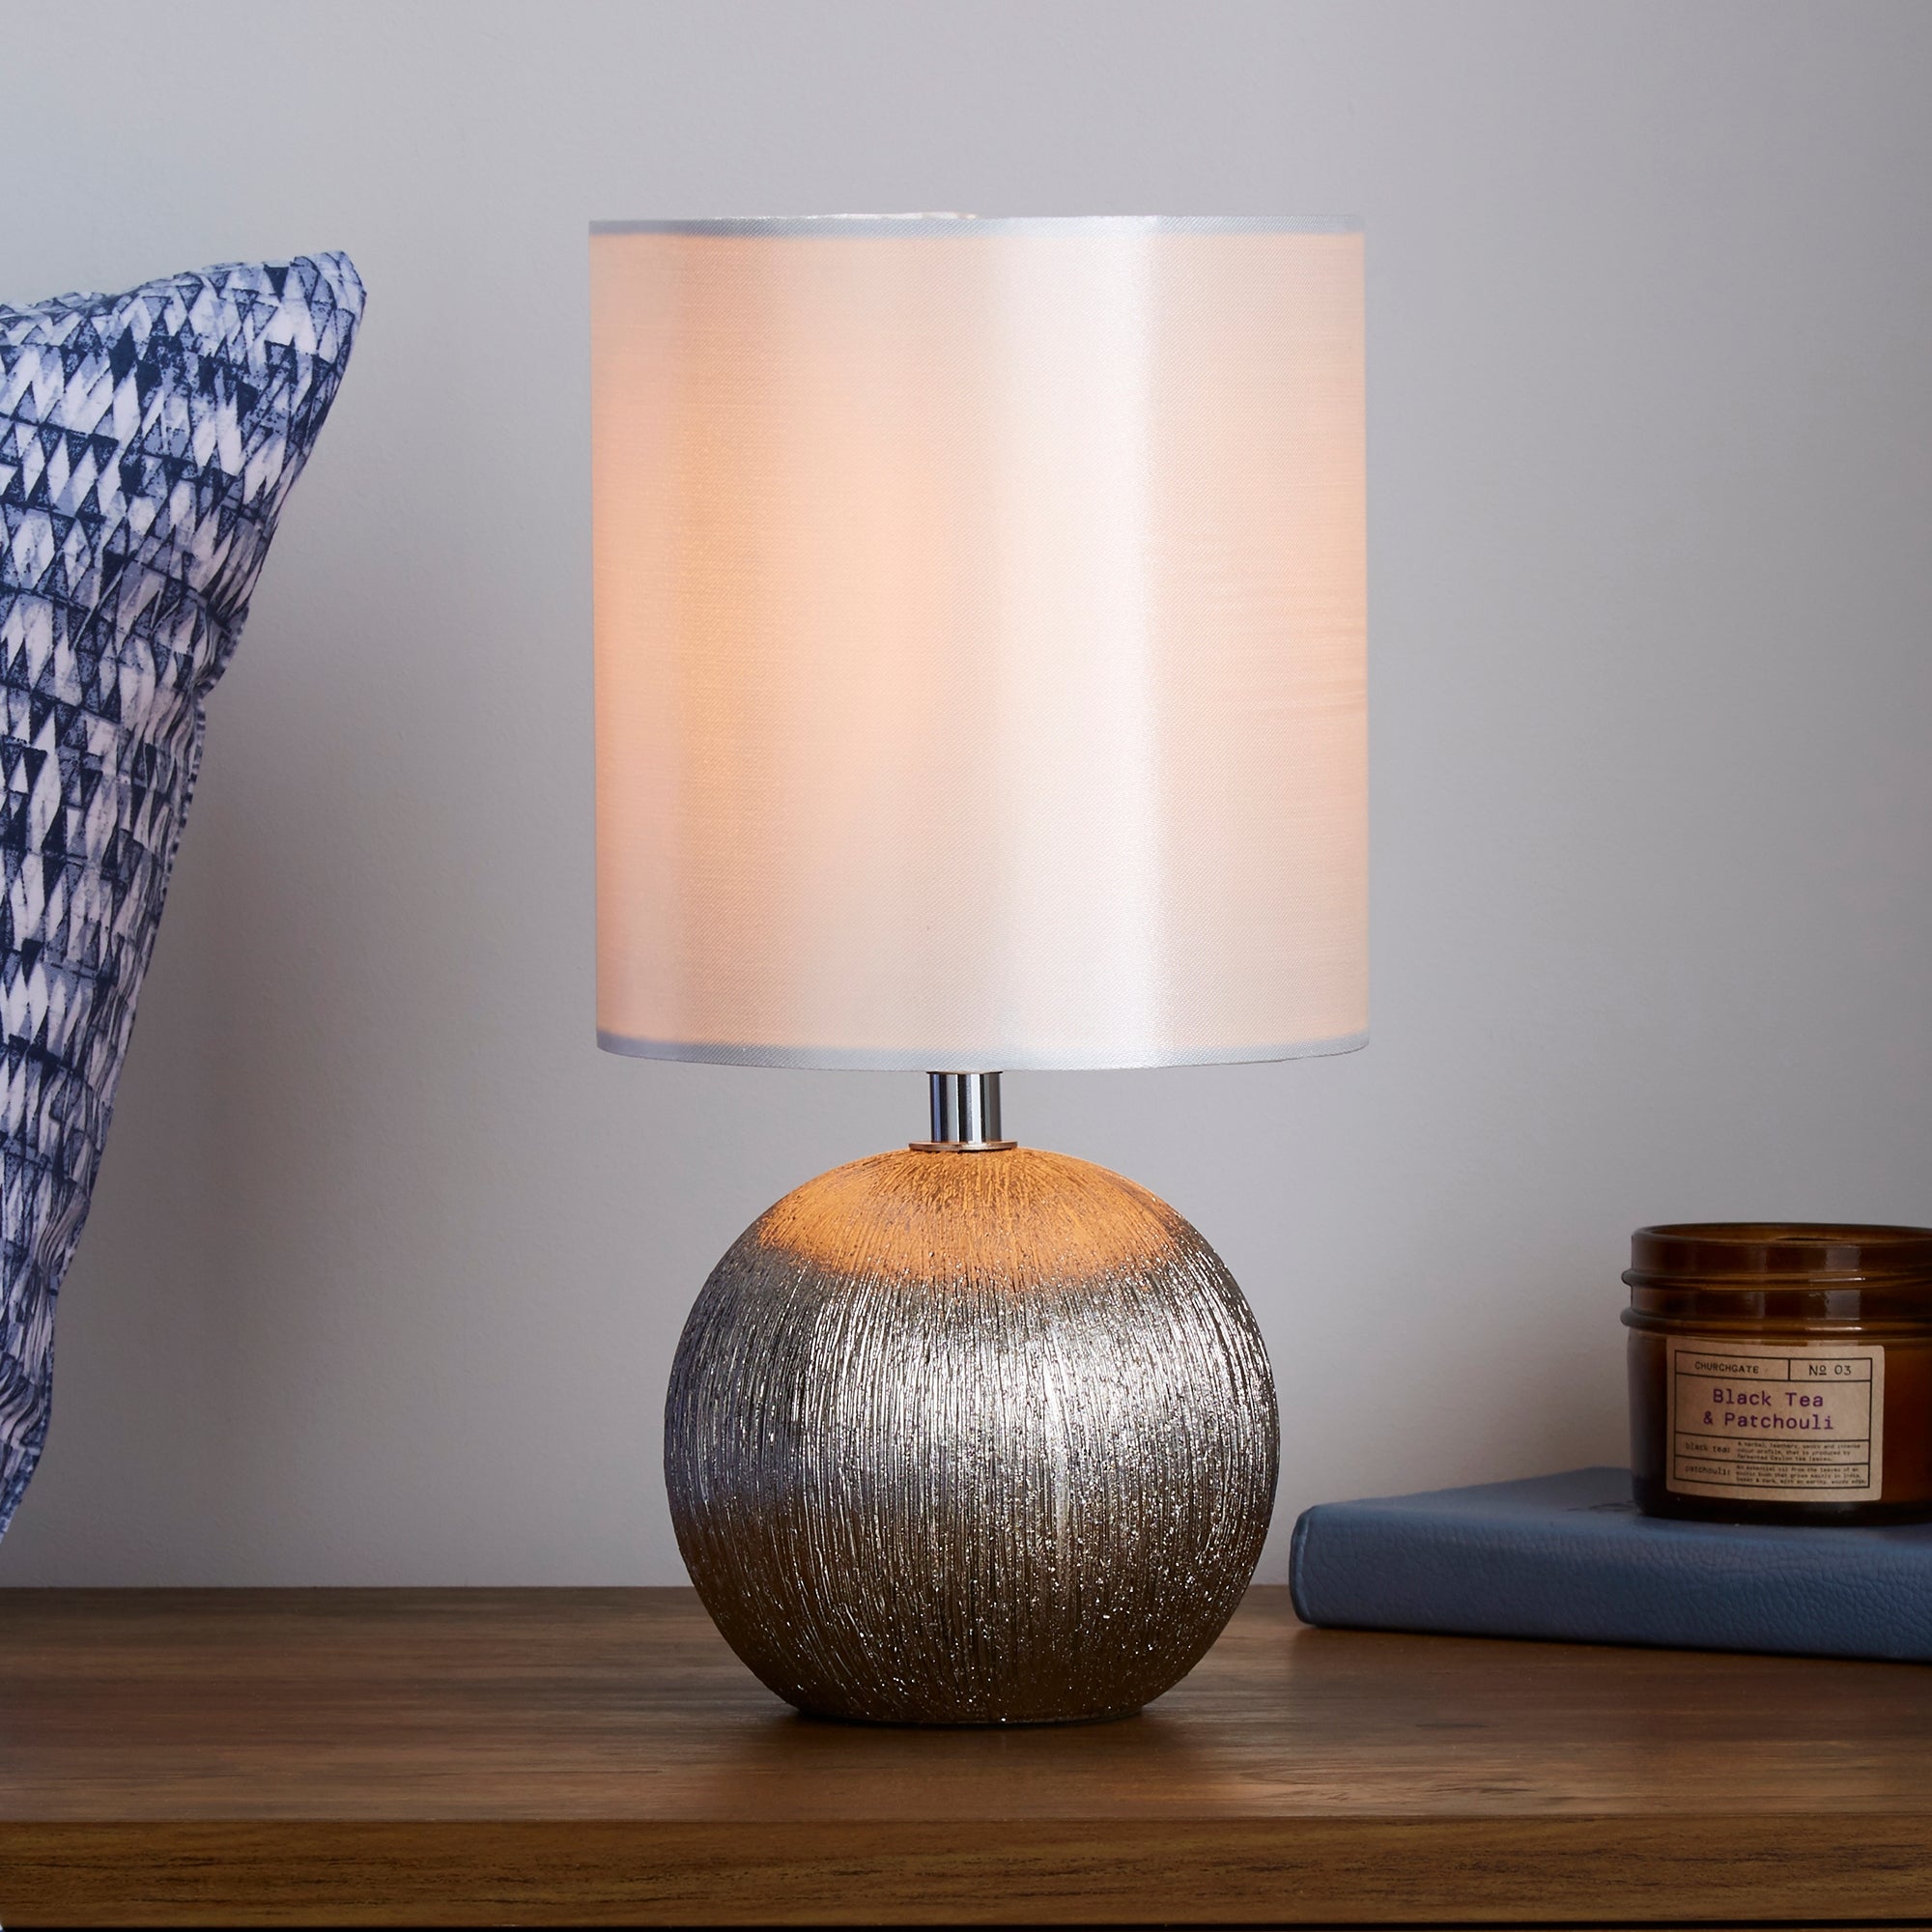 Adana Mini Ceramic Ivory Touch Dimmable Table Lamp